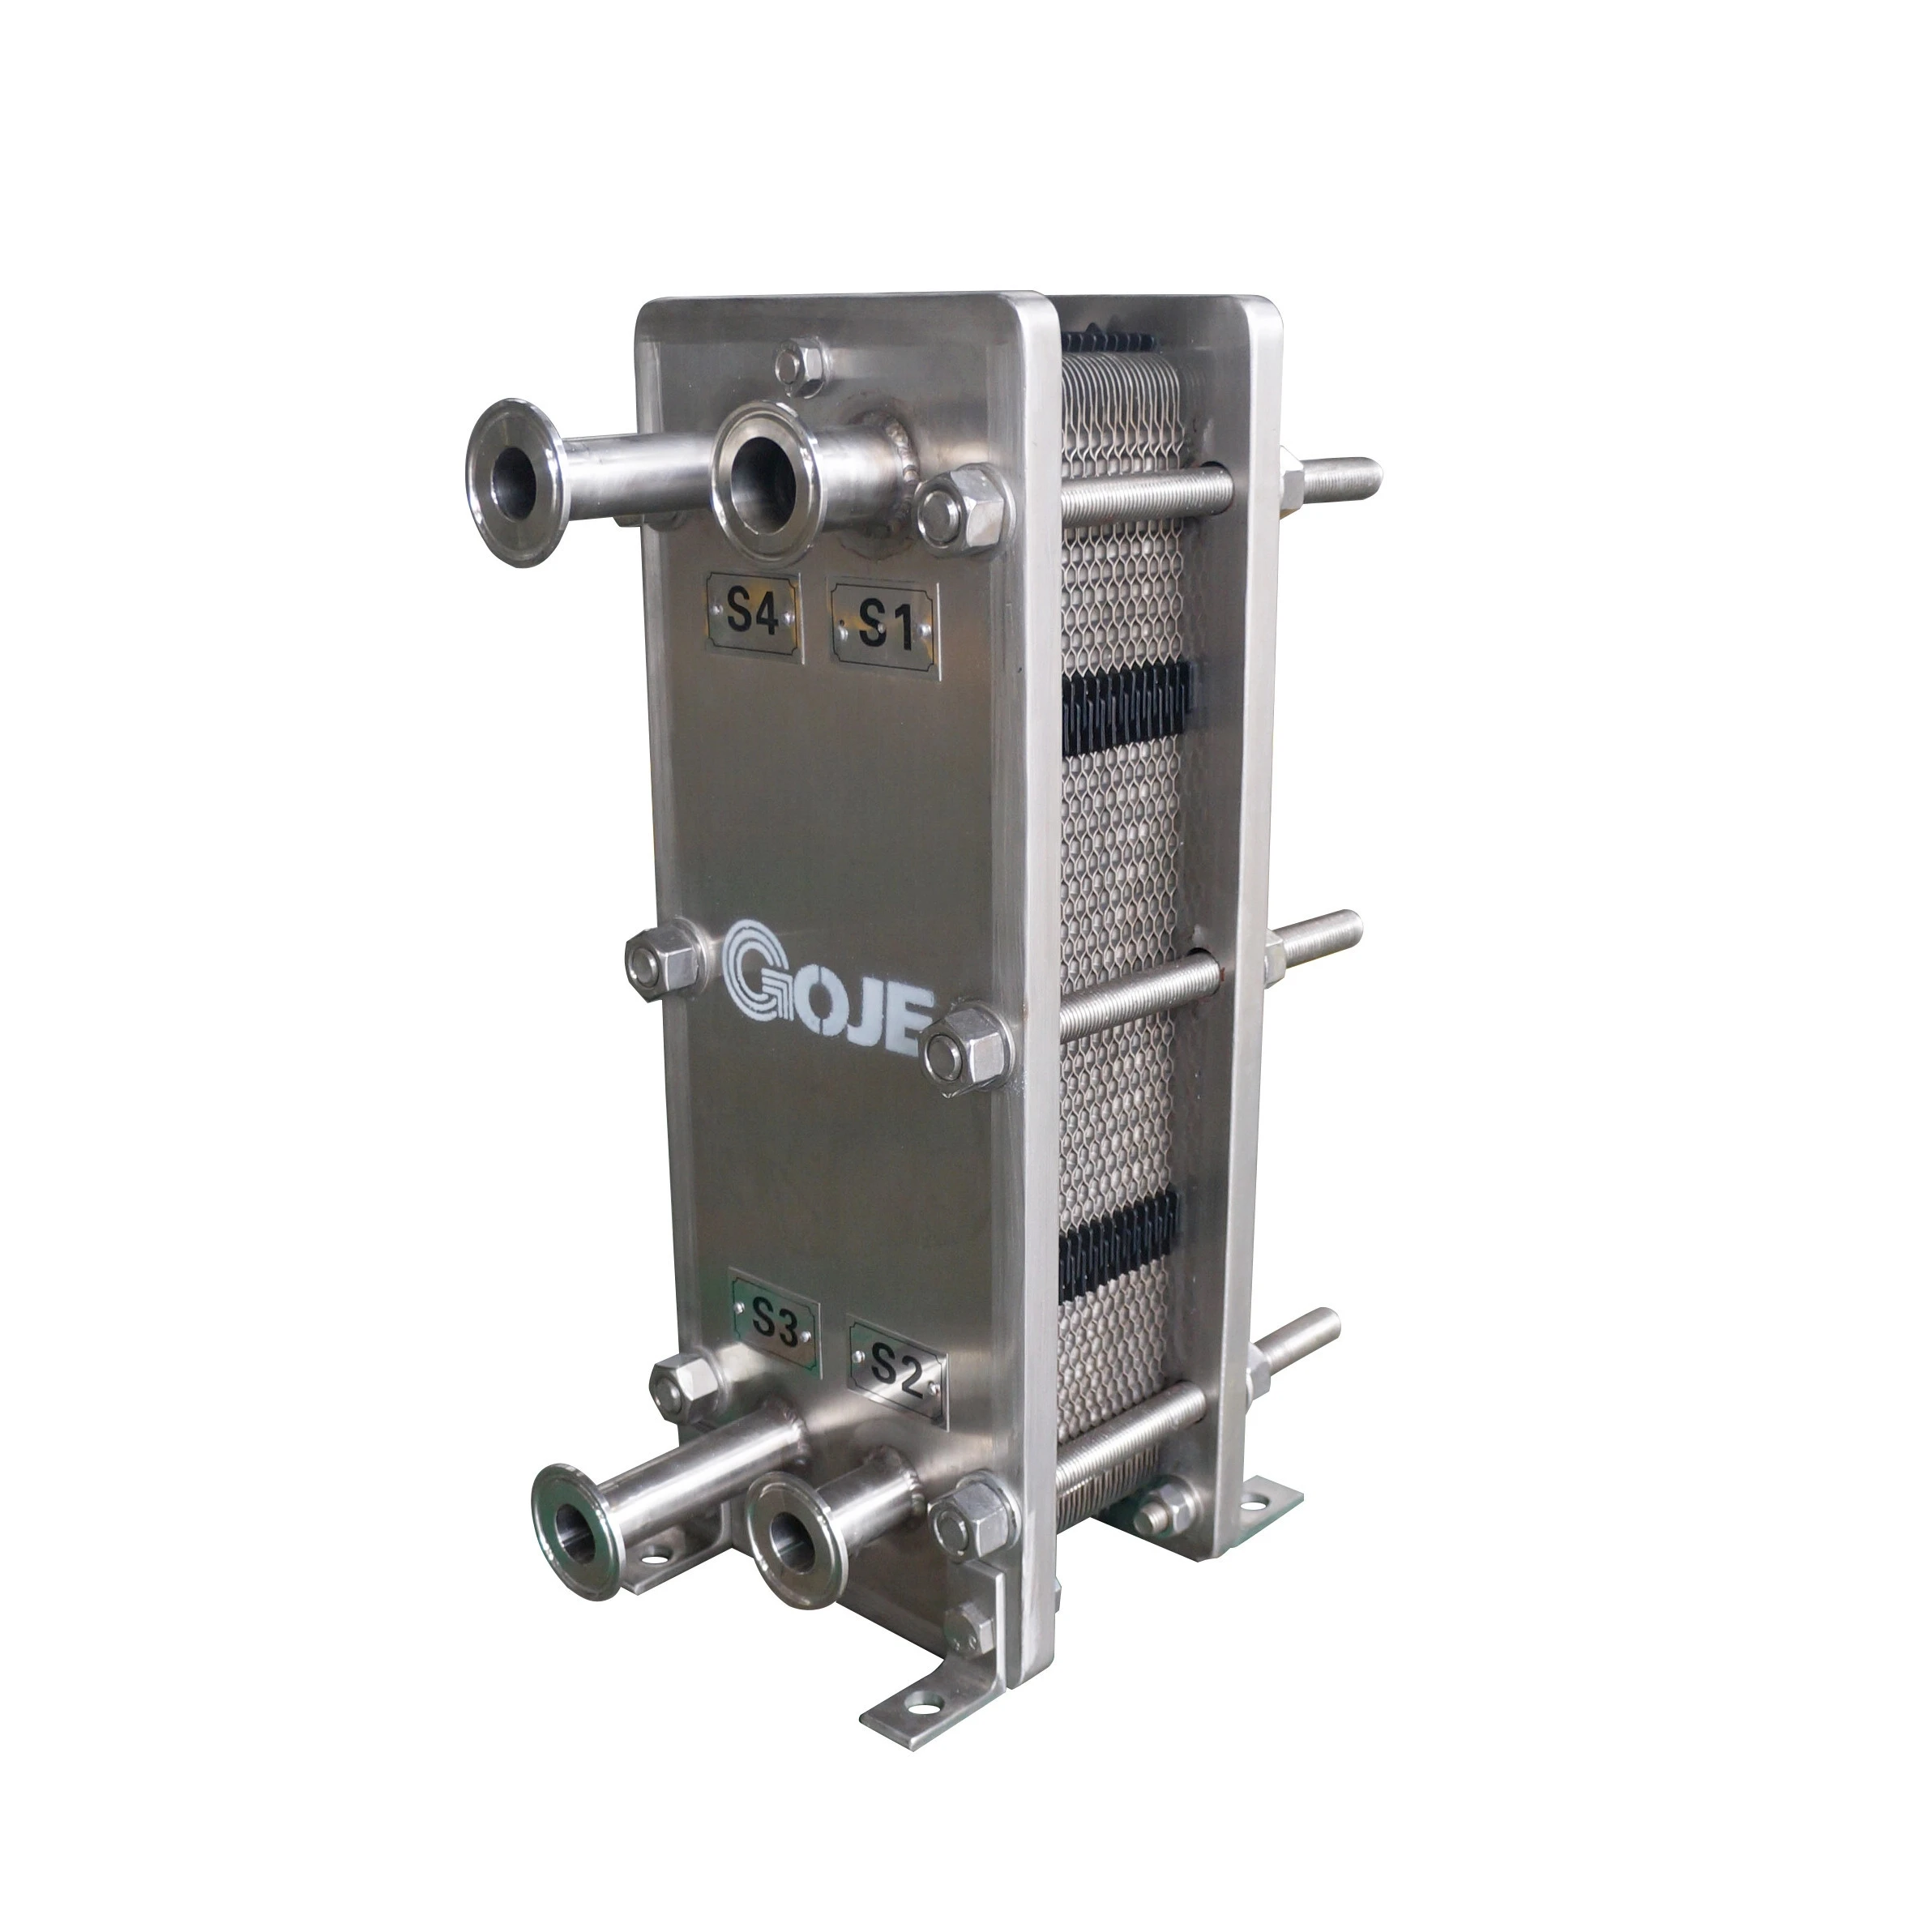 Copper/ Nickel /Stainless Steel Brazed Plate Heat Exchanger cooling water evaporator for refrigeration nanjing bang win